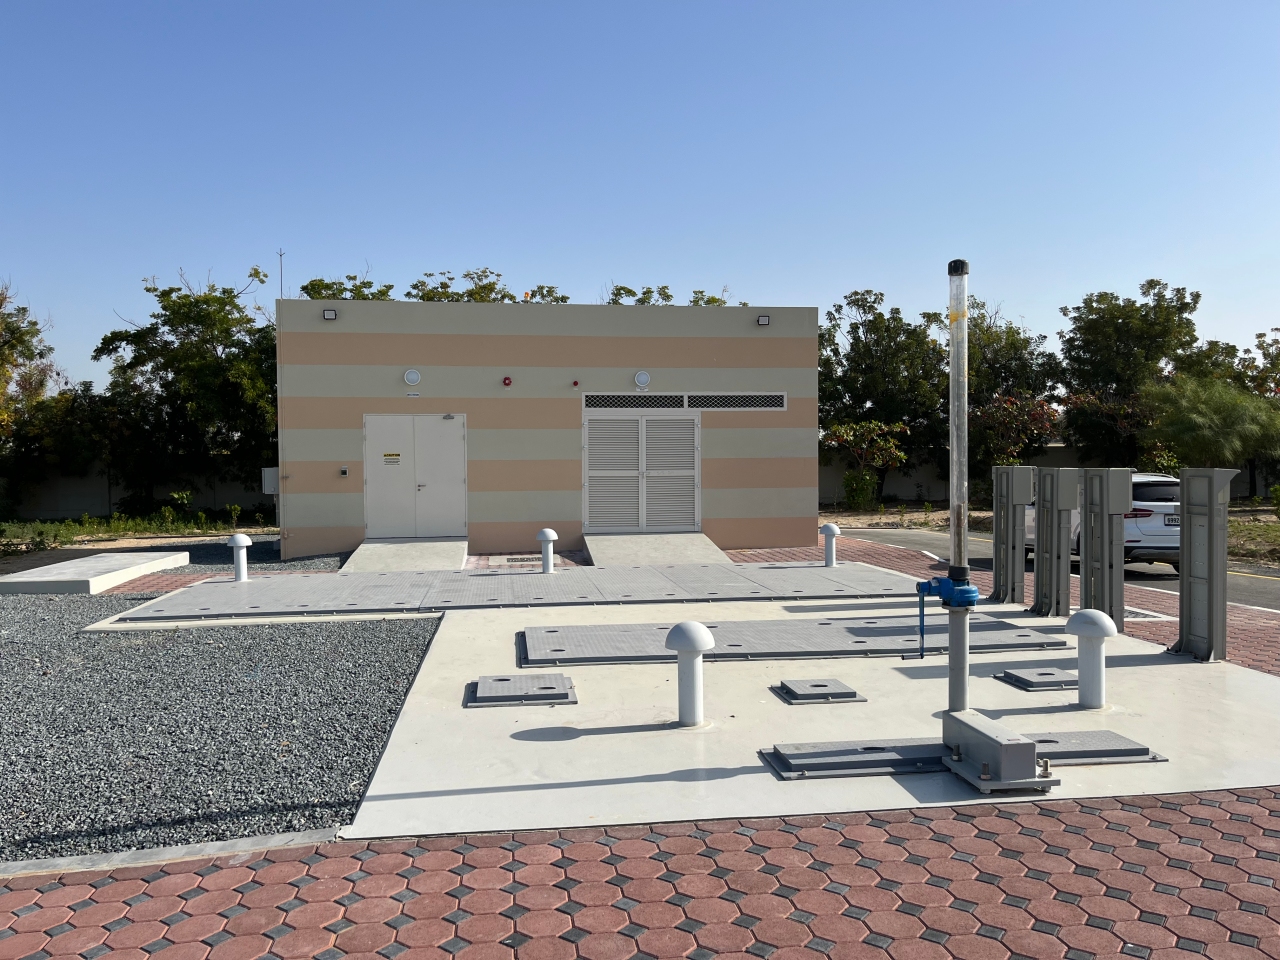 Storm Water Pumping Station